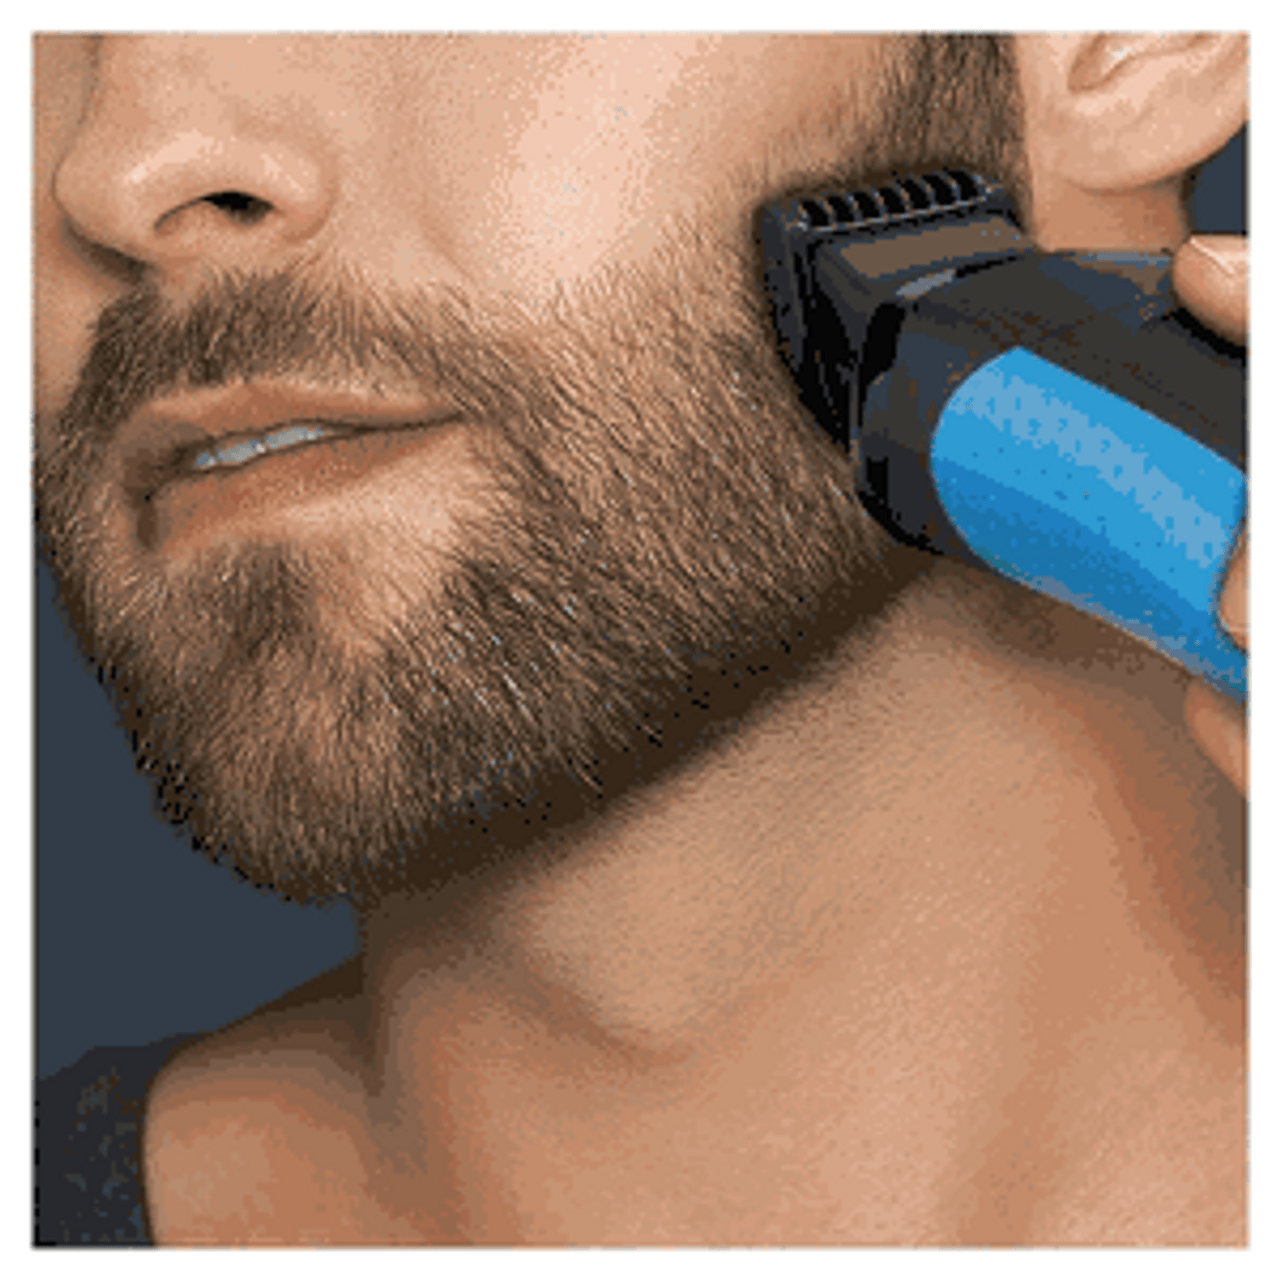 https://cdn11.bigcommerce.com/s-r1ds5cvocb/images/stencil/1280x1280/products/453/746/braun-series-3-shaver-bear-grooming-attachement-set-part-number-bt32-12__19760.1675363517.gif?c=1